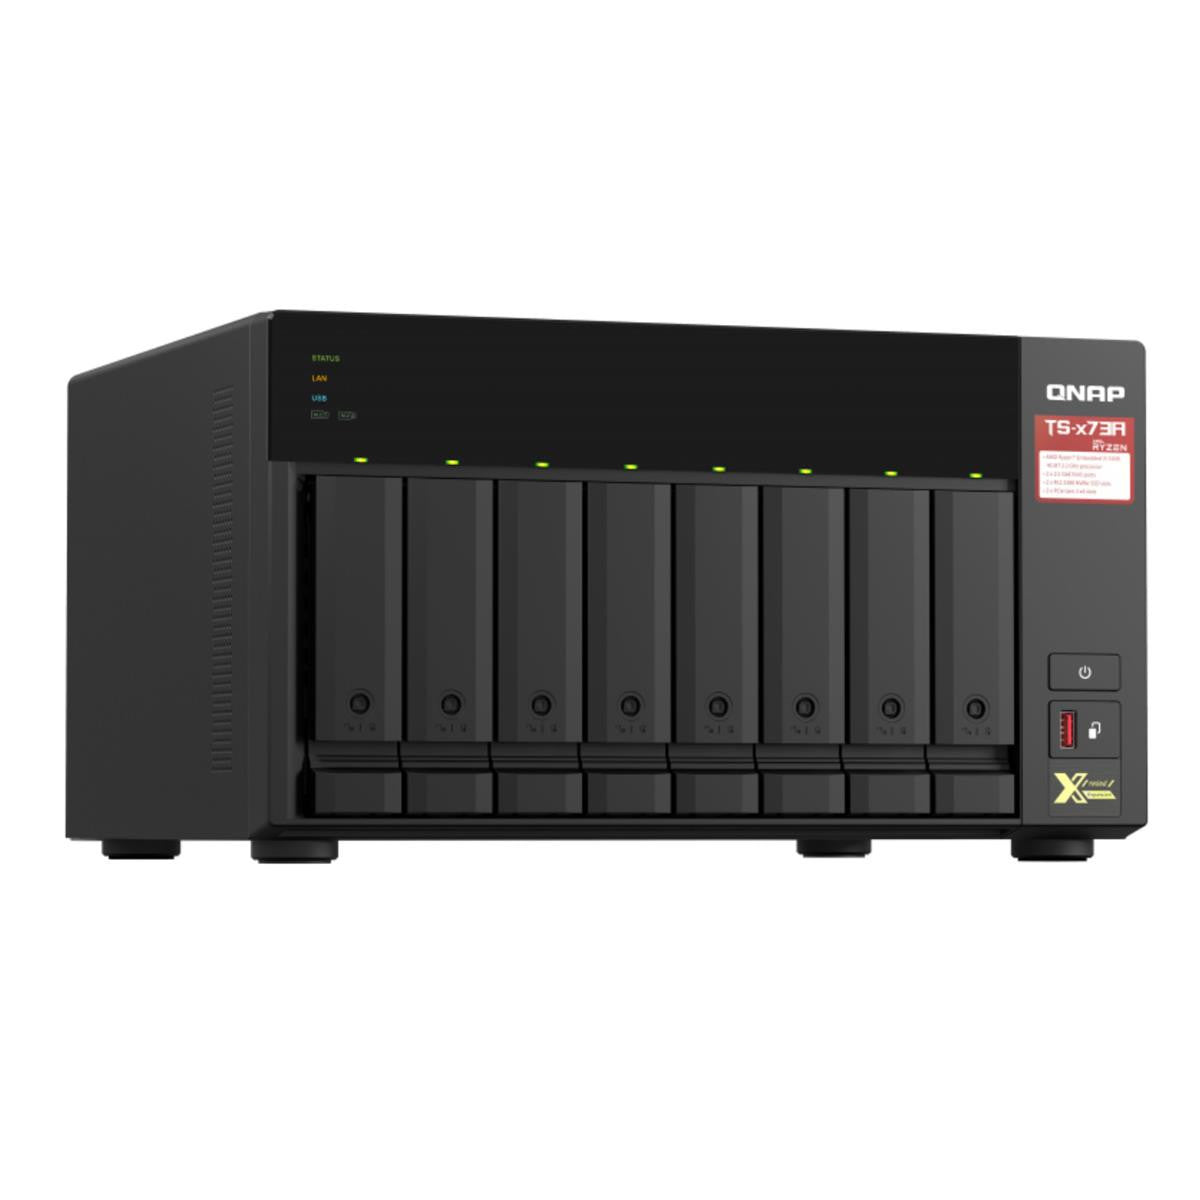 QNAP TS-873A 8-BAY NAS with 32GB DDR4 RAM and 32TB (8x4TB) Western Digital RED PLUS Drives Fully Assembled and Tested